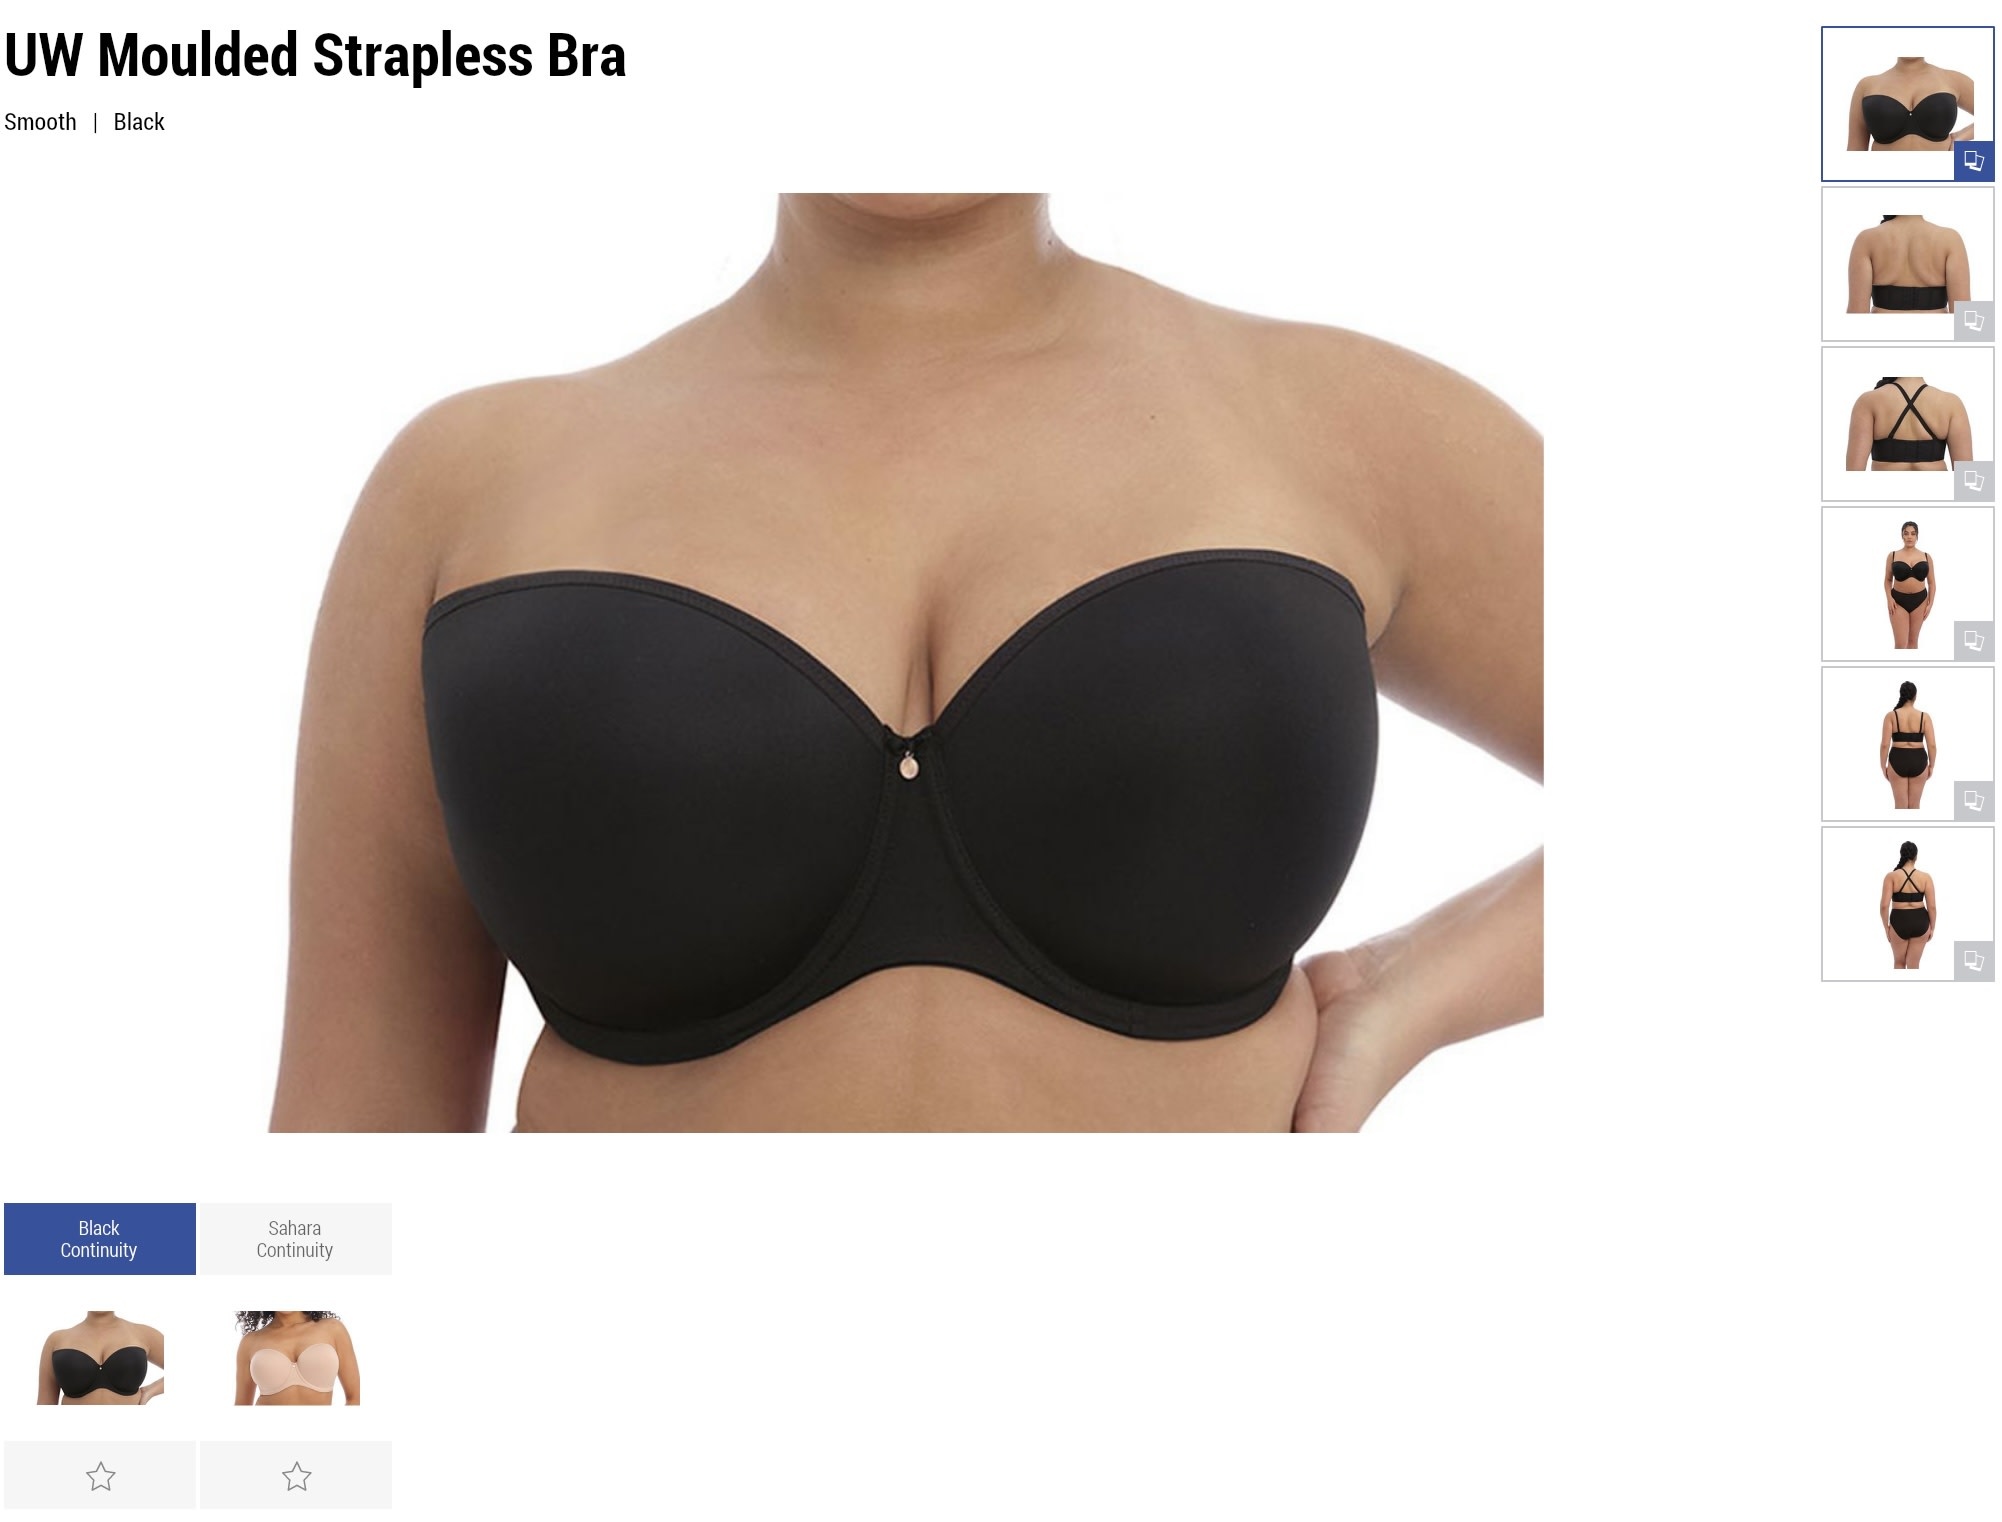 Elomi Smooth UW Moulded Strapless